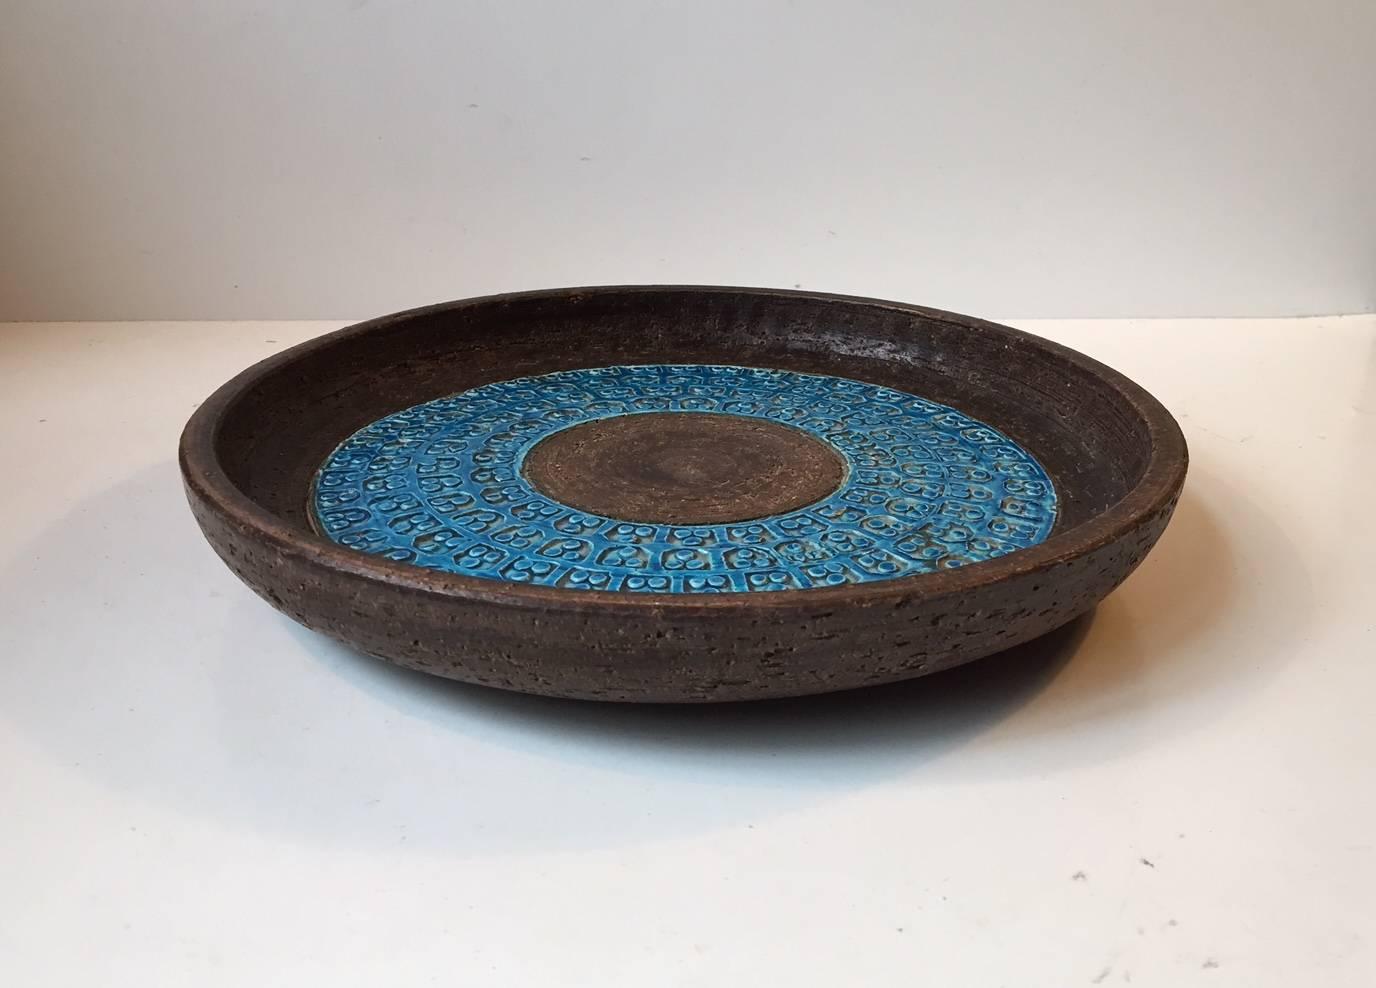 Aldo Londi designed this lacquered large stoneware bowl with Rimini Blue Trifoglio patterns. It was manufactured in Italy by Bitossi during the 1960s.